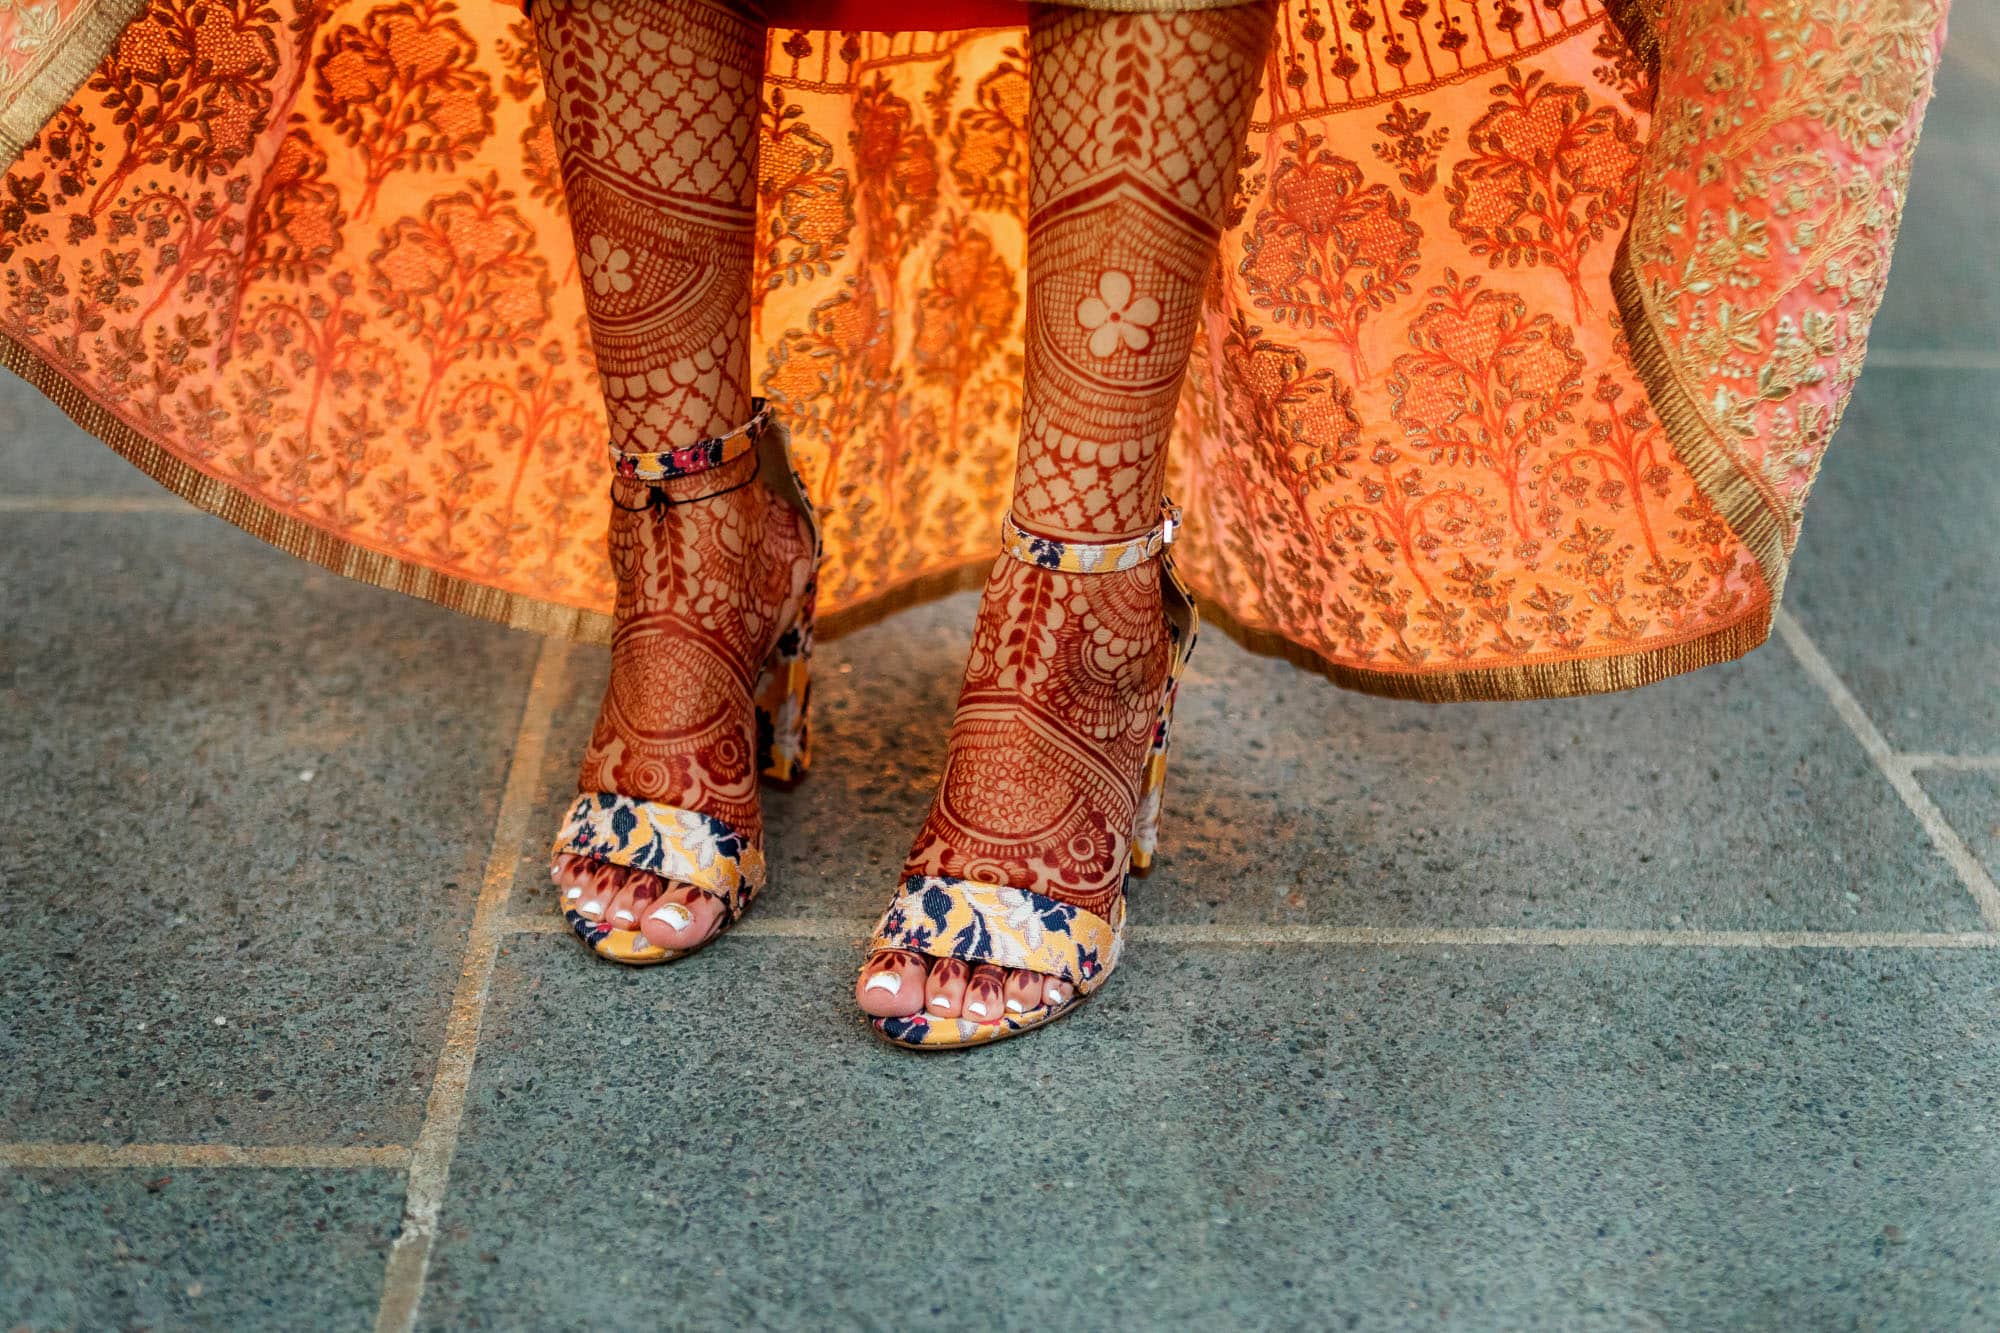 The bride showing off the wedding henna on her legs